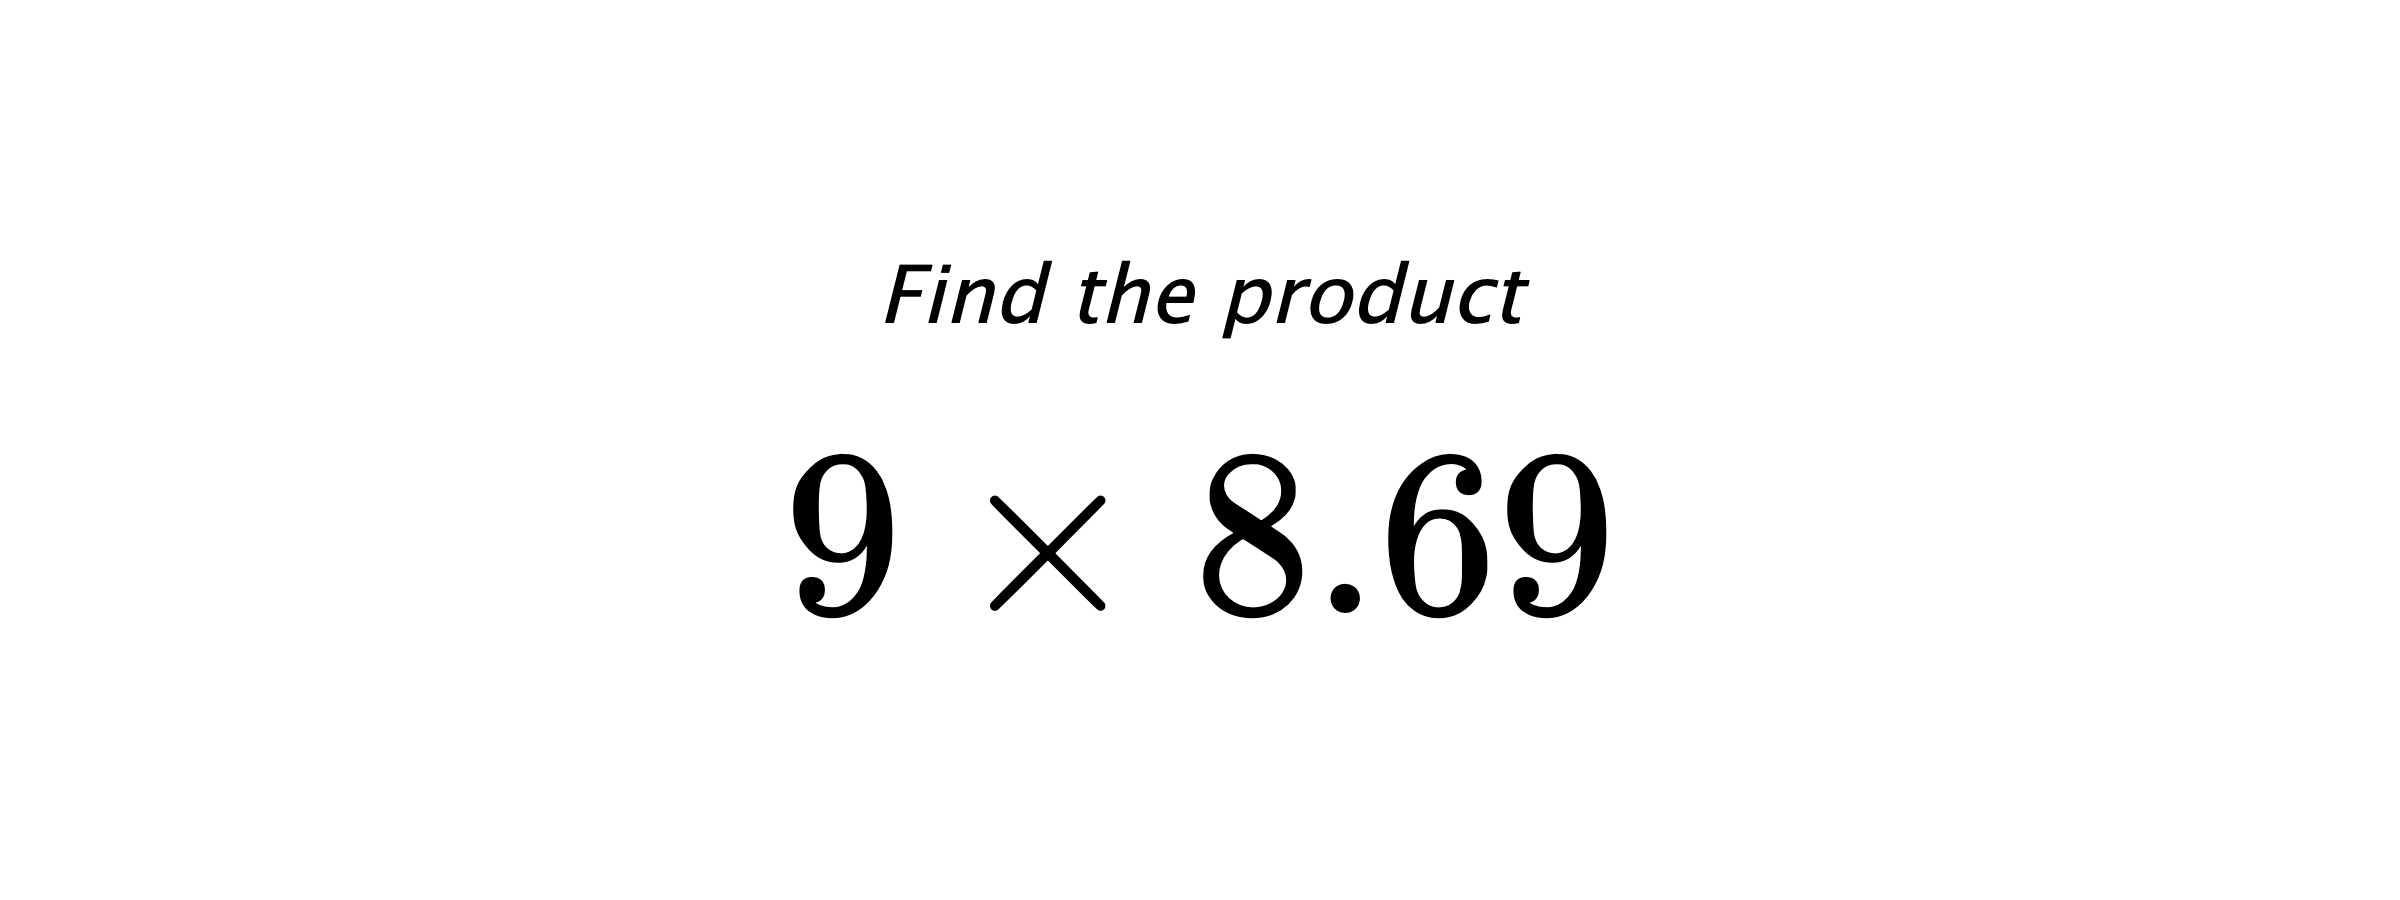 Find the product $ 9 \times 8.69 $